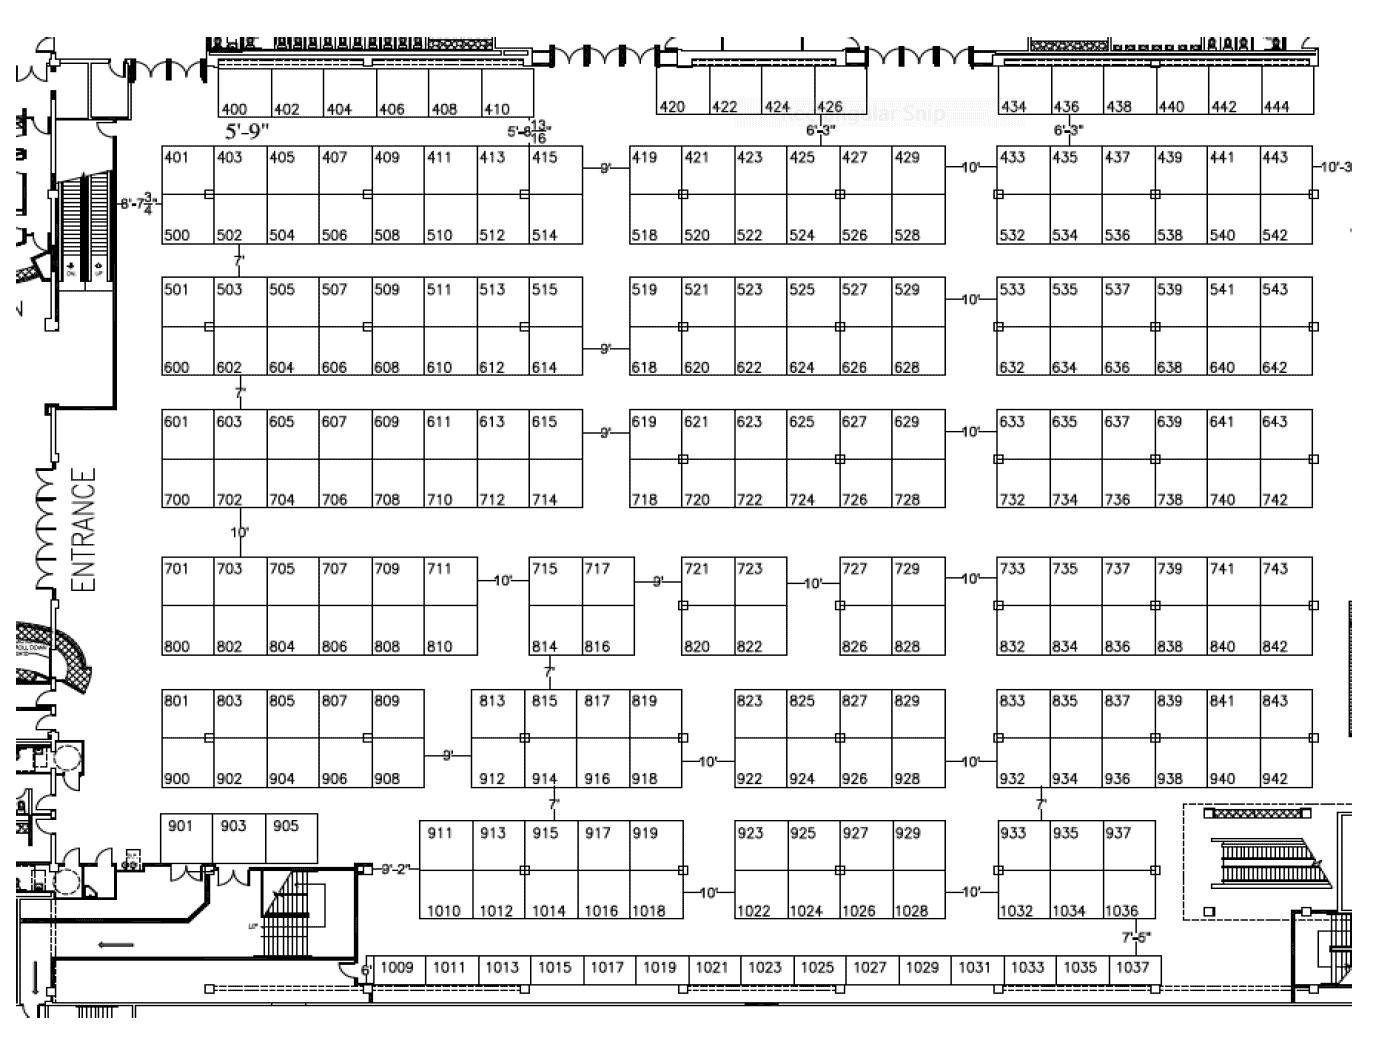 Miami Export Import Trade Floorplan and Booths